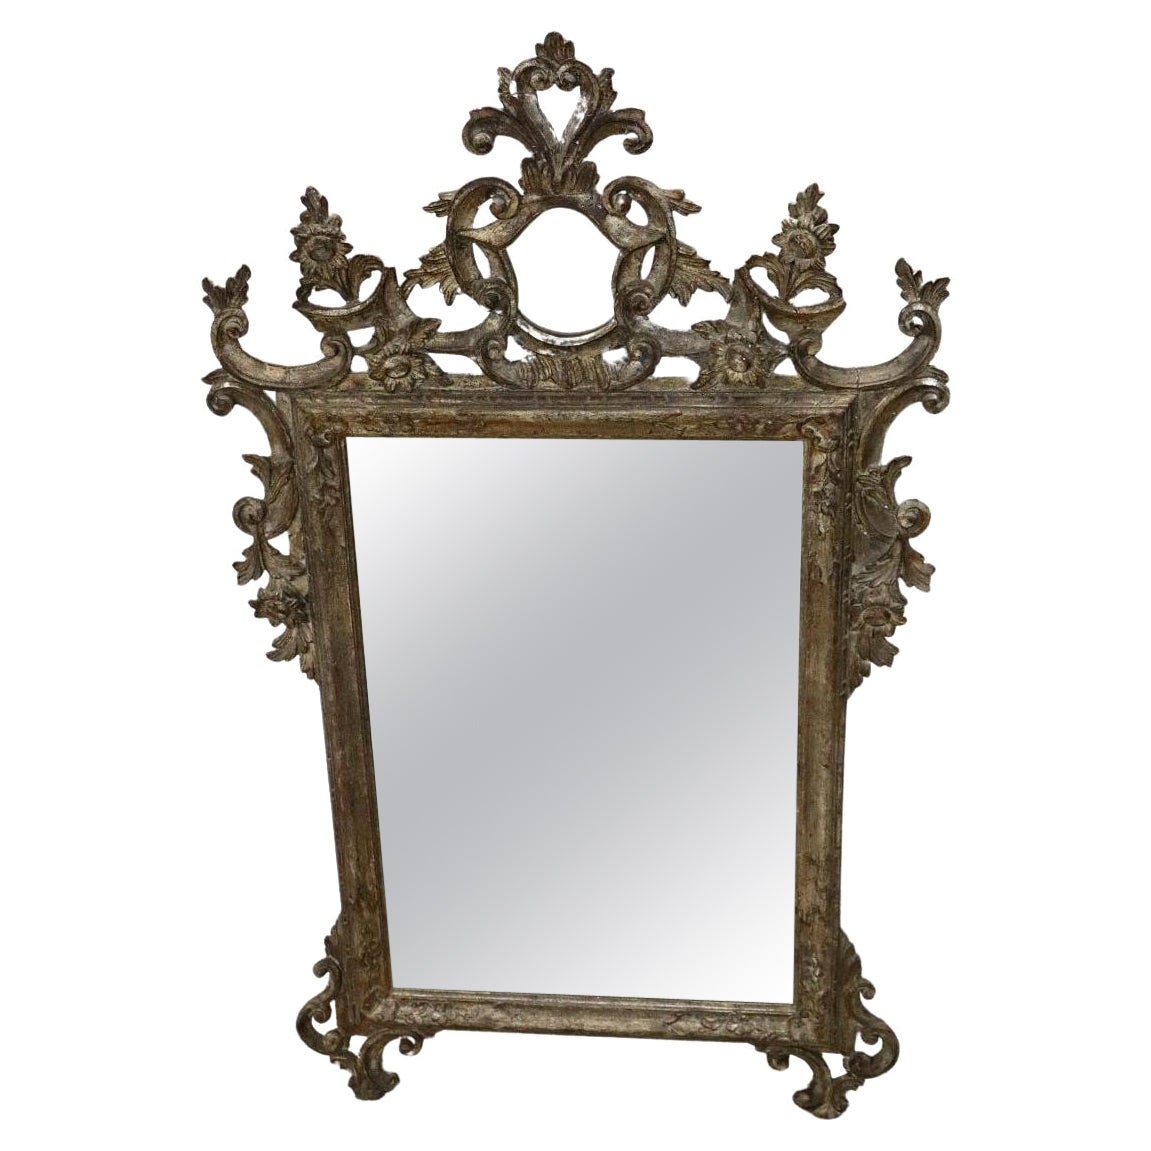 Early 20th Century Italian Louis XV Style Carved and Silvered Wood Wall Mirror